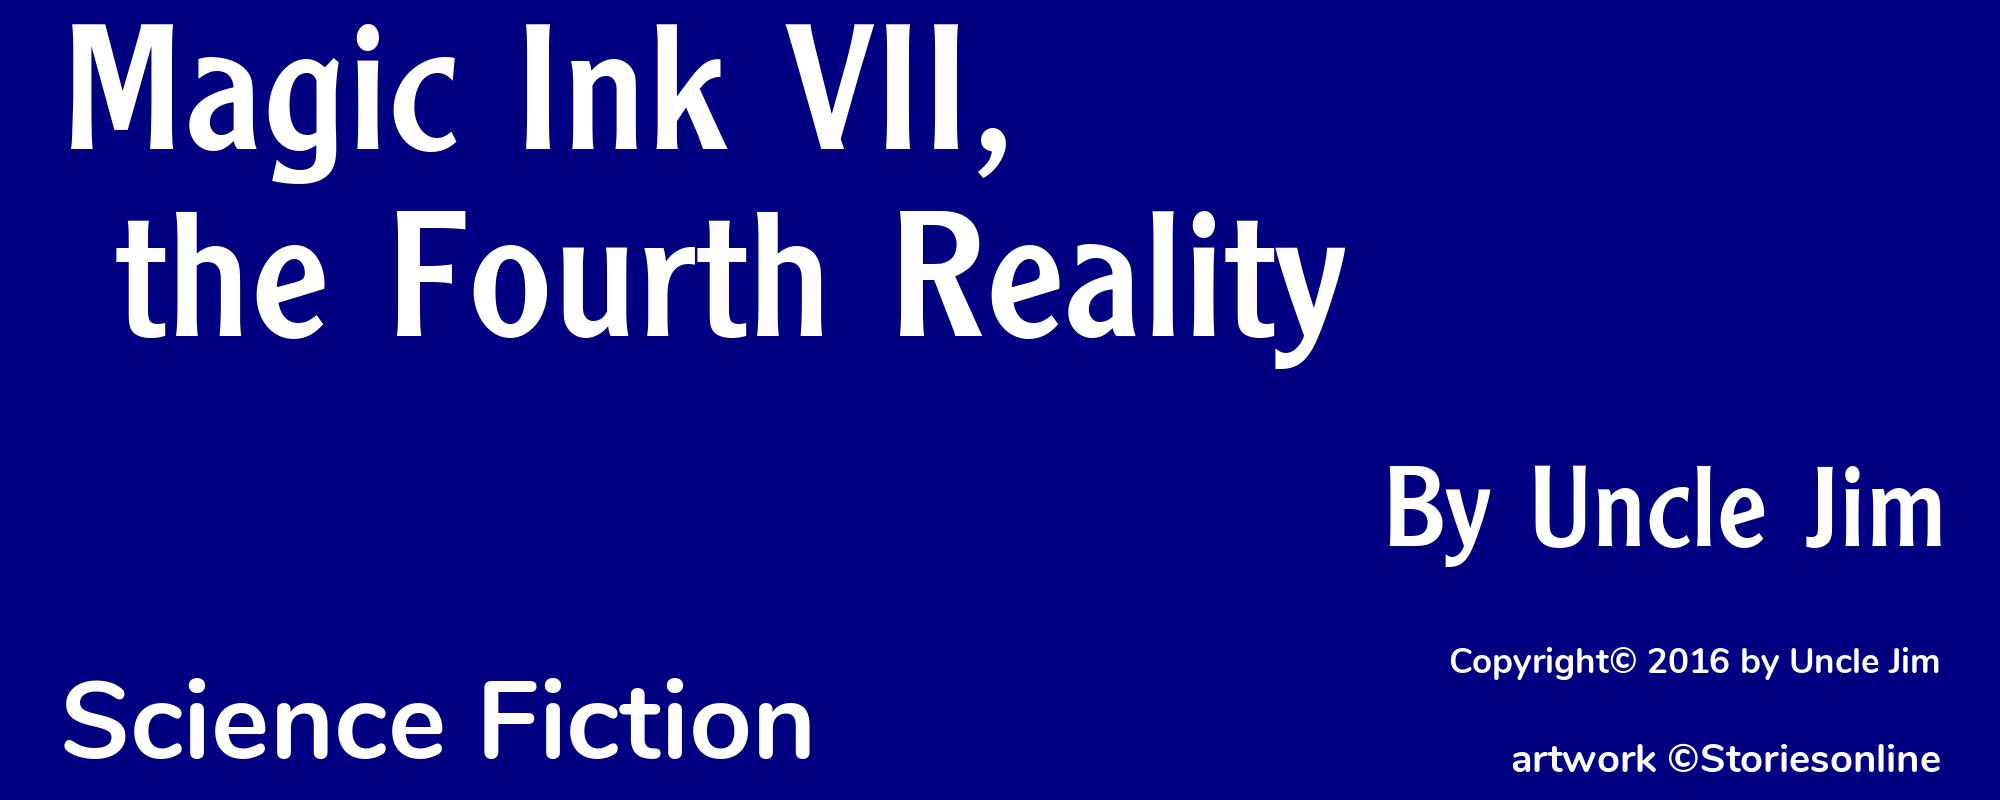 Magic Ink VII, the Fourth Reality - Cover